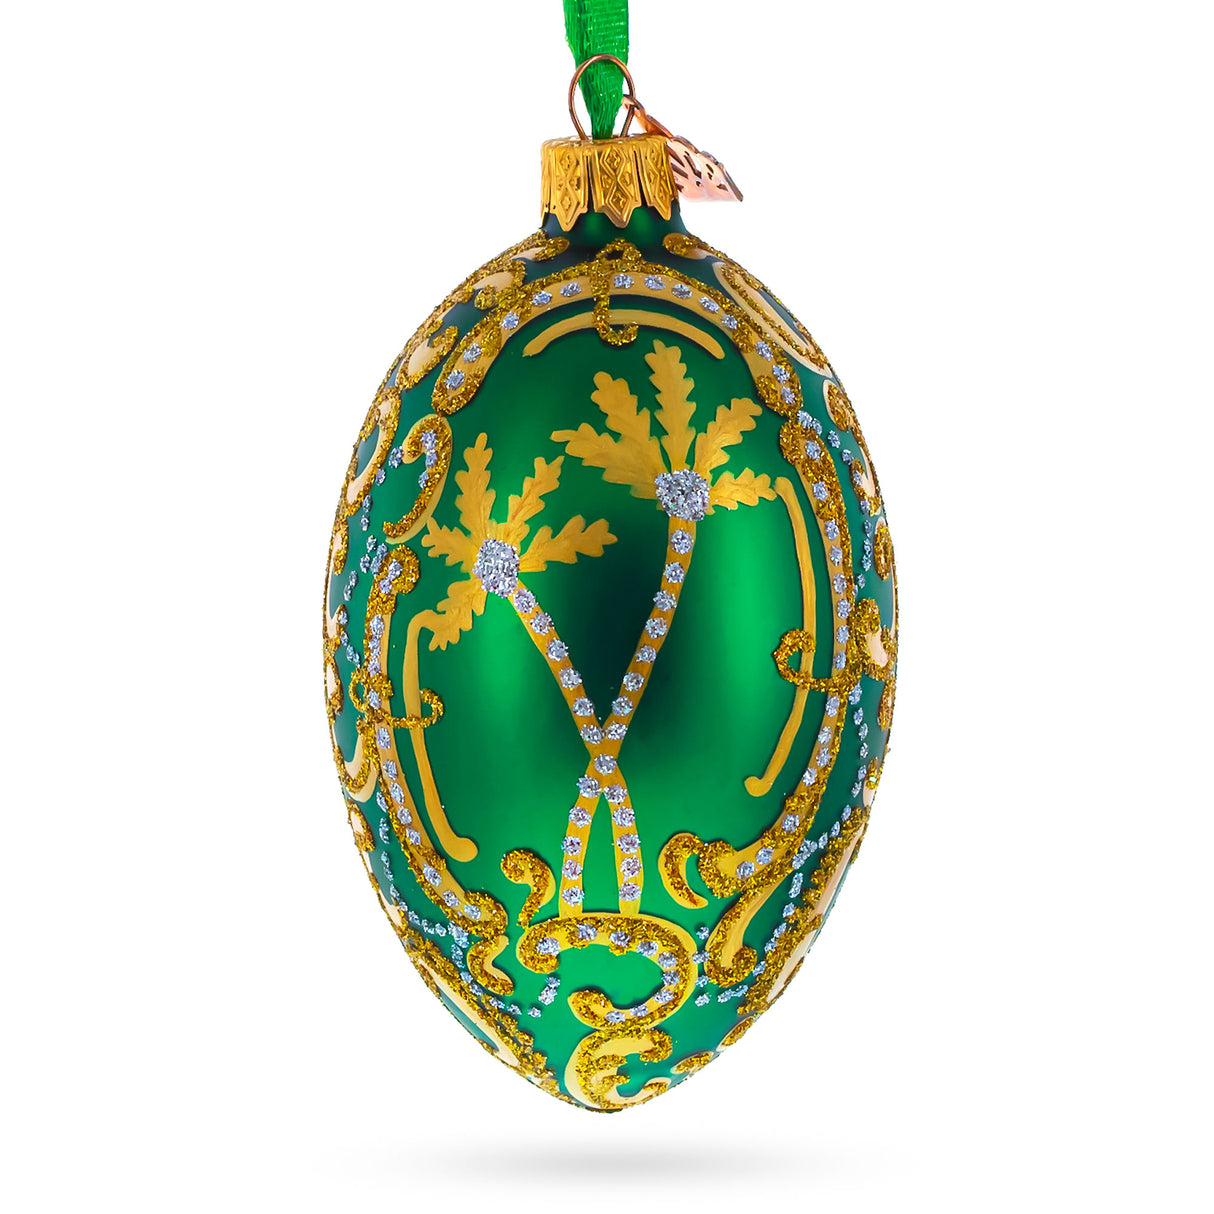 Glass 1902 Rocaille Kelch Glass Egg Ornament 4 Inches in Green color Oval